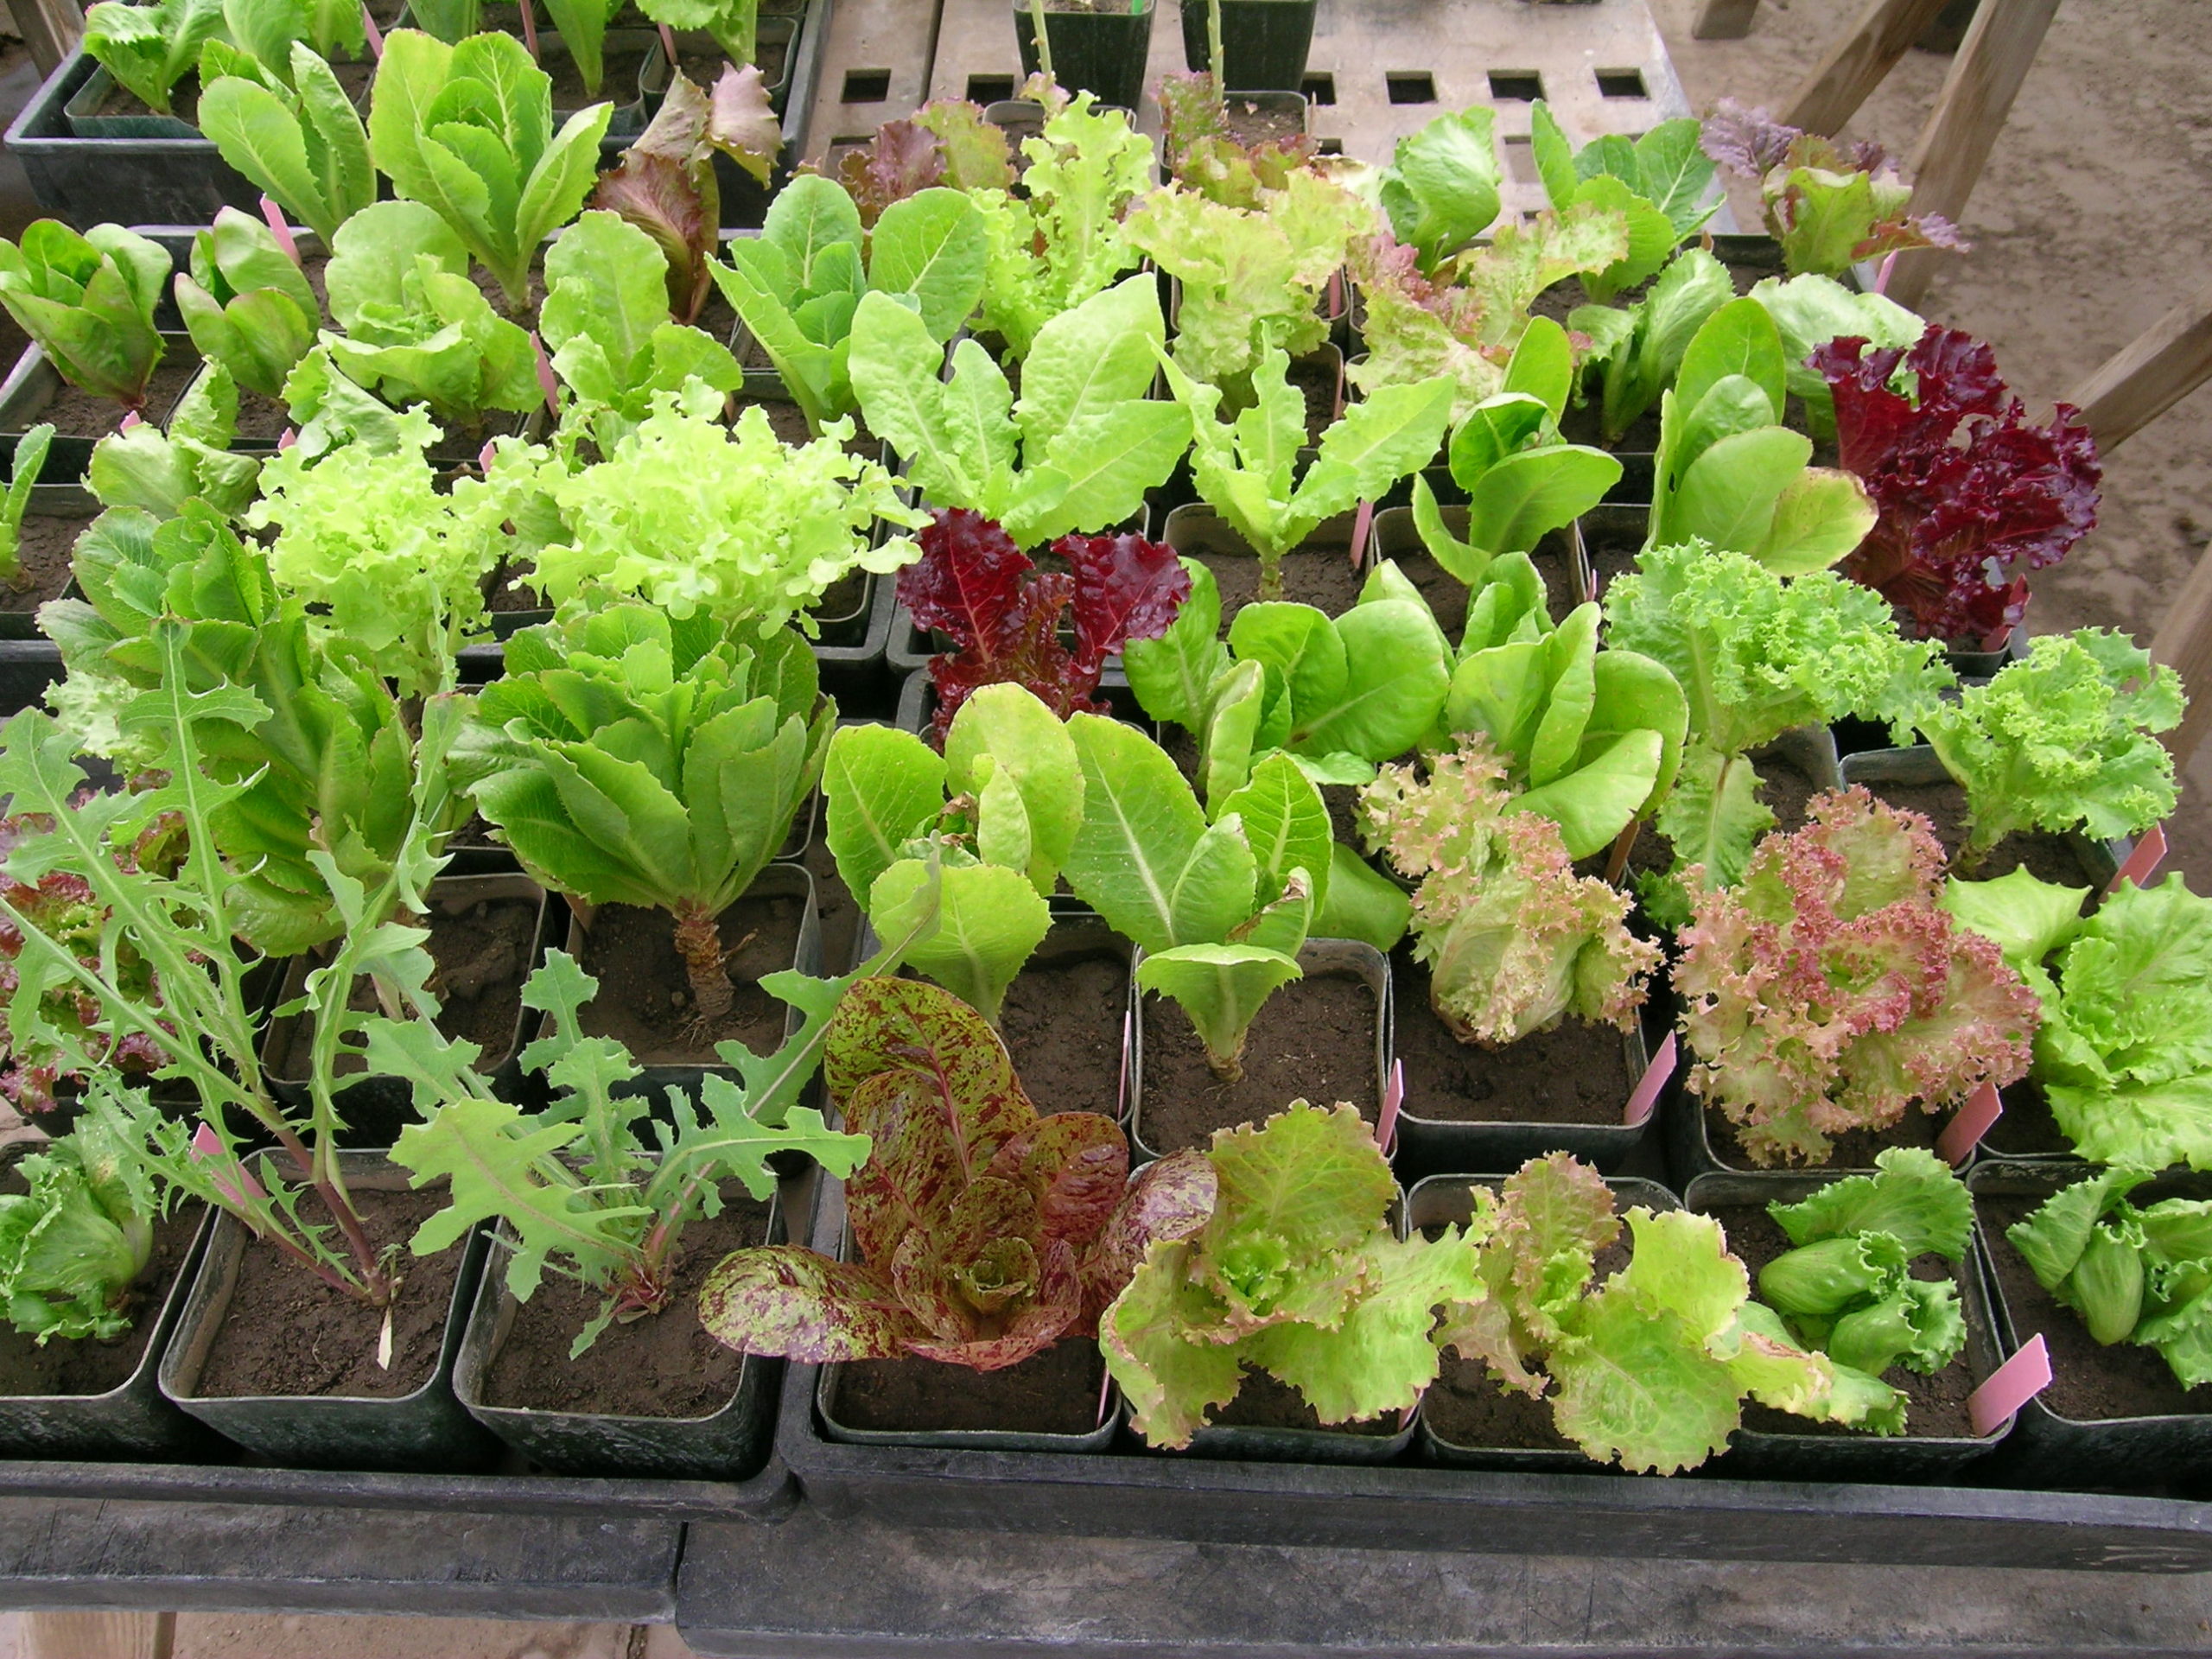 A tray full of lettuce seedlings of diverse varieties, colors and textures